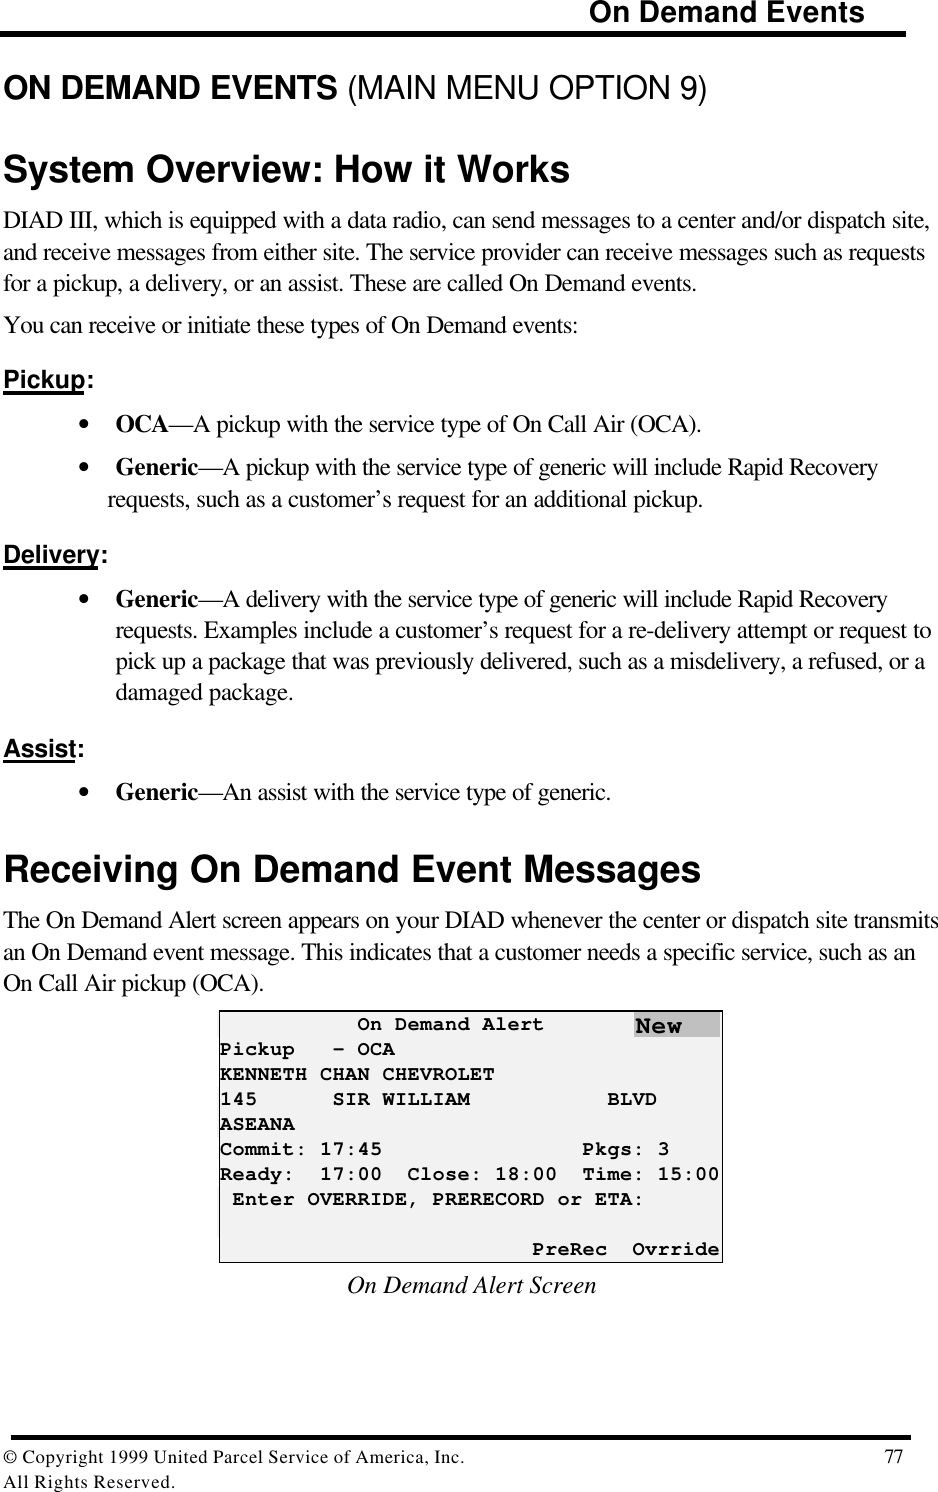                                                                            On Demand Events© Copyright 1999 United Parcel Service of America, Inc.  77All Rights Reserved.ON DEMAND EVENTS (MAIN MENU OPTION 9)System Overview: How it WorksDIAD III, which is equipped with a data radio, can send messages to a center and/or dispatch site,and receive messages from either site. The service provider can receive messages such as requestsfor a pickup, a delivery, or an assist. These are called On Demand events.You can receive or initiate these types of On Demand events:Pickup:• OCA—A pickup with the service type of On Call Air (OCA).• Generic—A pickup with the service type of generic will include Rapid Recoveryrequests, such as a customer’s request for an additional pickup.Delivery:• Generic—A delivery with the service type of generic will include Rapid Recoveryrequests. Examples include a customer’s request for a re-delivery attempt or request topick up a package that was previously delivered, such as a misdelivery, a refused, or adamaged package.Assist:• Generic—An assist with the service type of generic.Receiving On Demand Event MessagesThe On Demand Alert screen appears on your DIAD whenever the center or dispatch site transmitsan On Demand event message. This indicates that a customer needs a specific service, such as anOn Call Air pickup (OCA).           On Demand AlertPickup   - OCAKENNETH CHAN CHEVROLET145      SIR WILLIAM           BLVDASEANACommit: 17:45                Pkgs: 3Ready:  17:00  Close: 18:00  Time: 15:00 Enter OVERRIDE, PRERECORD or ETA:                         PreRec  OvrrideOn Demand Alert ScreenNew